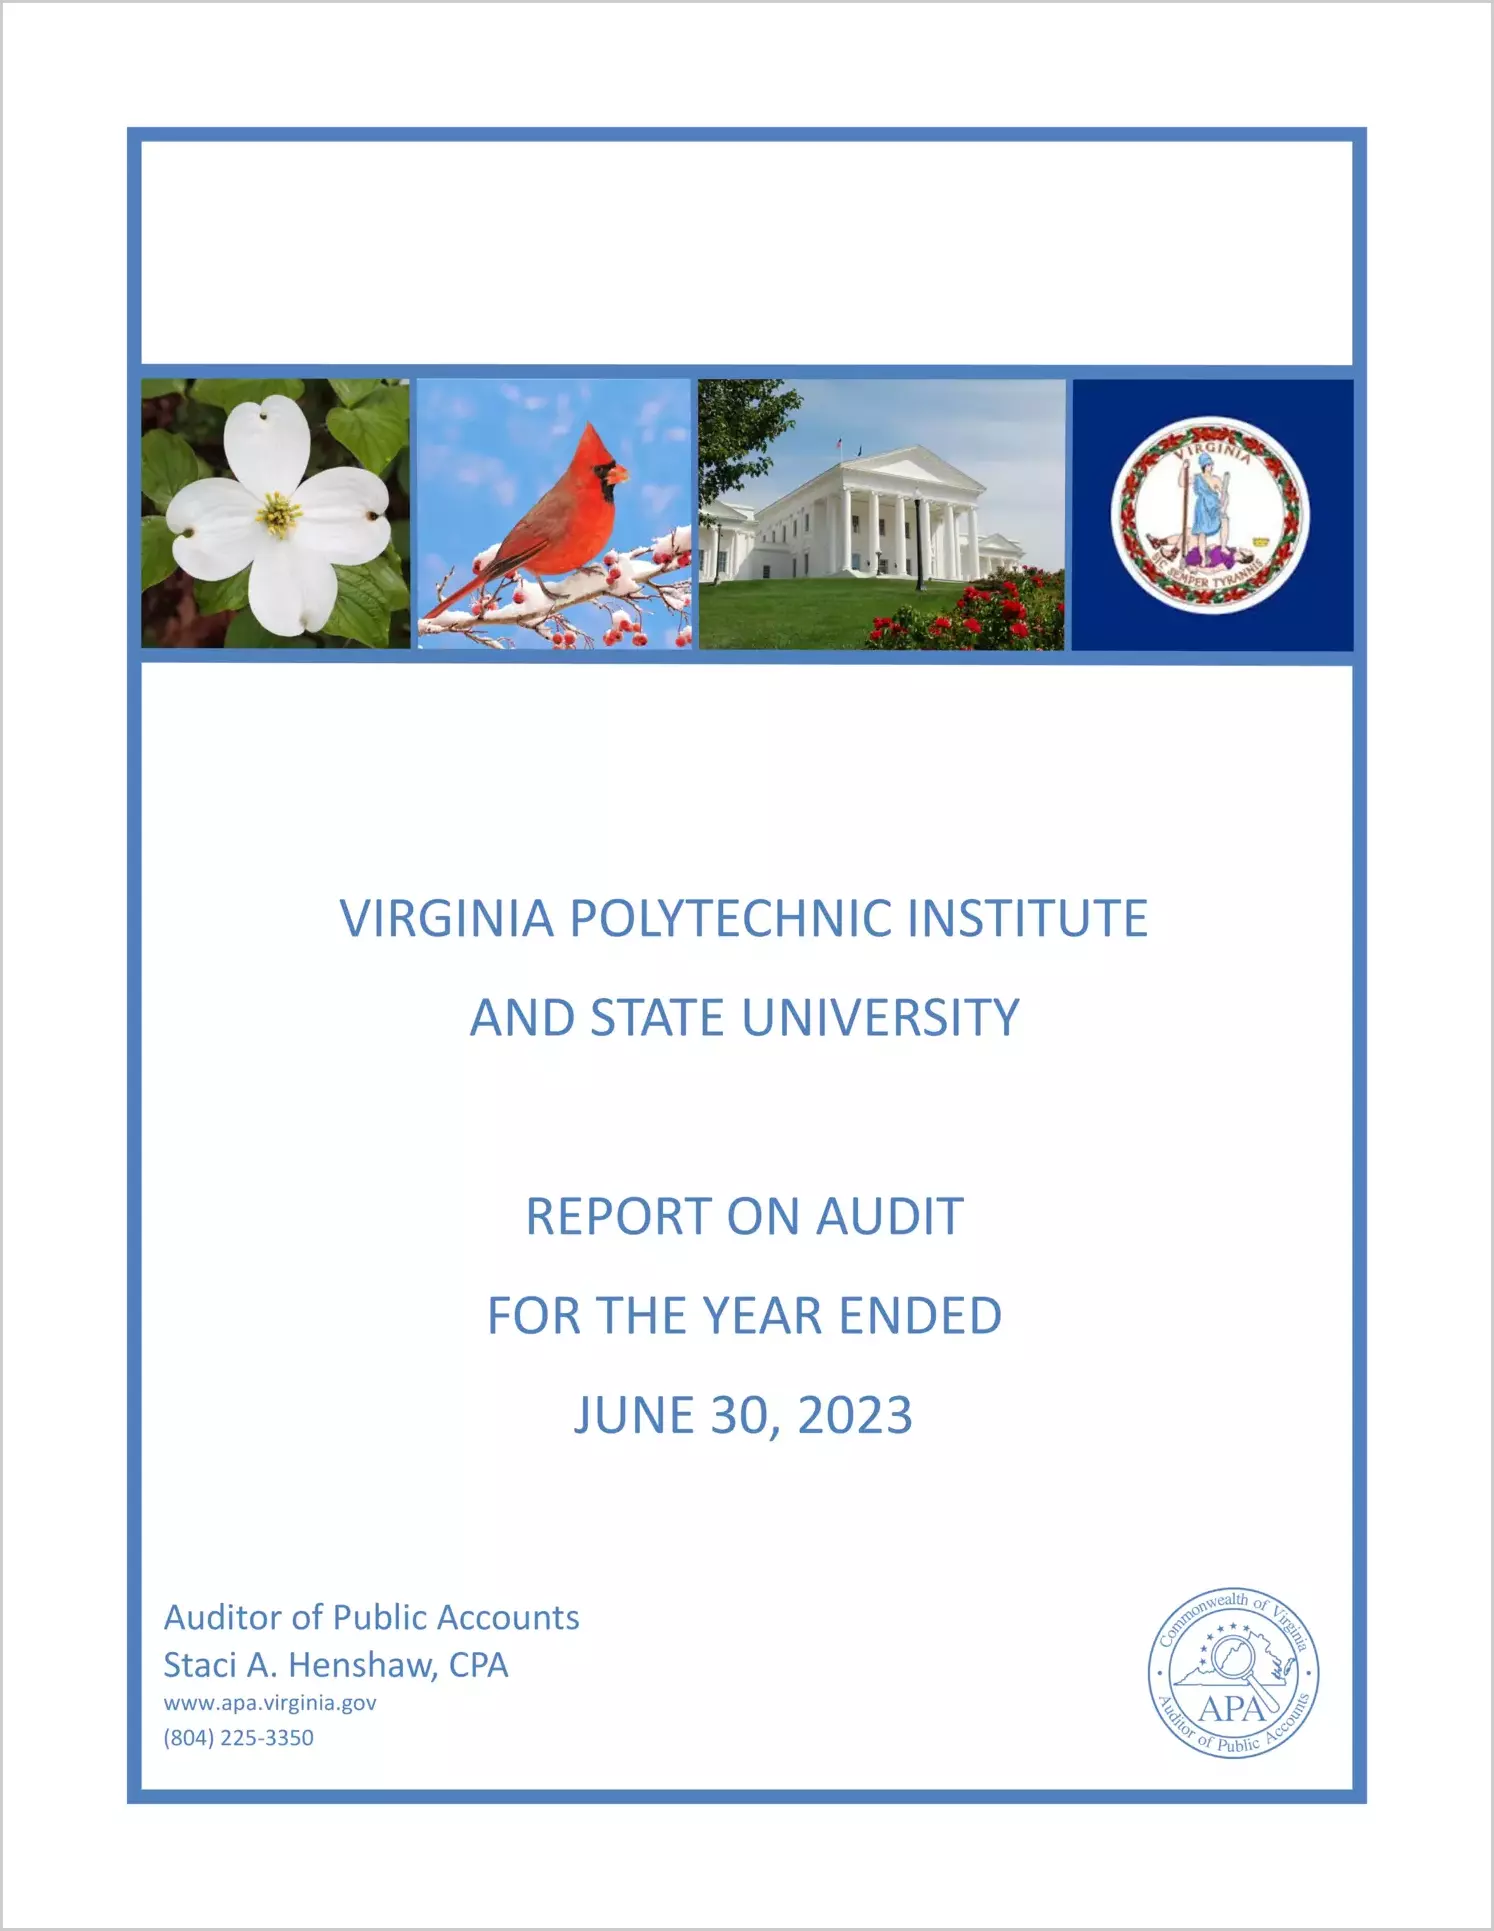 Virginia Polytechnic Institute and State University for the year ended June 30, 2023